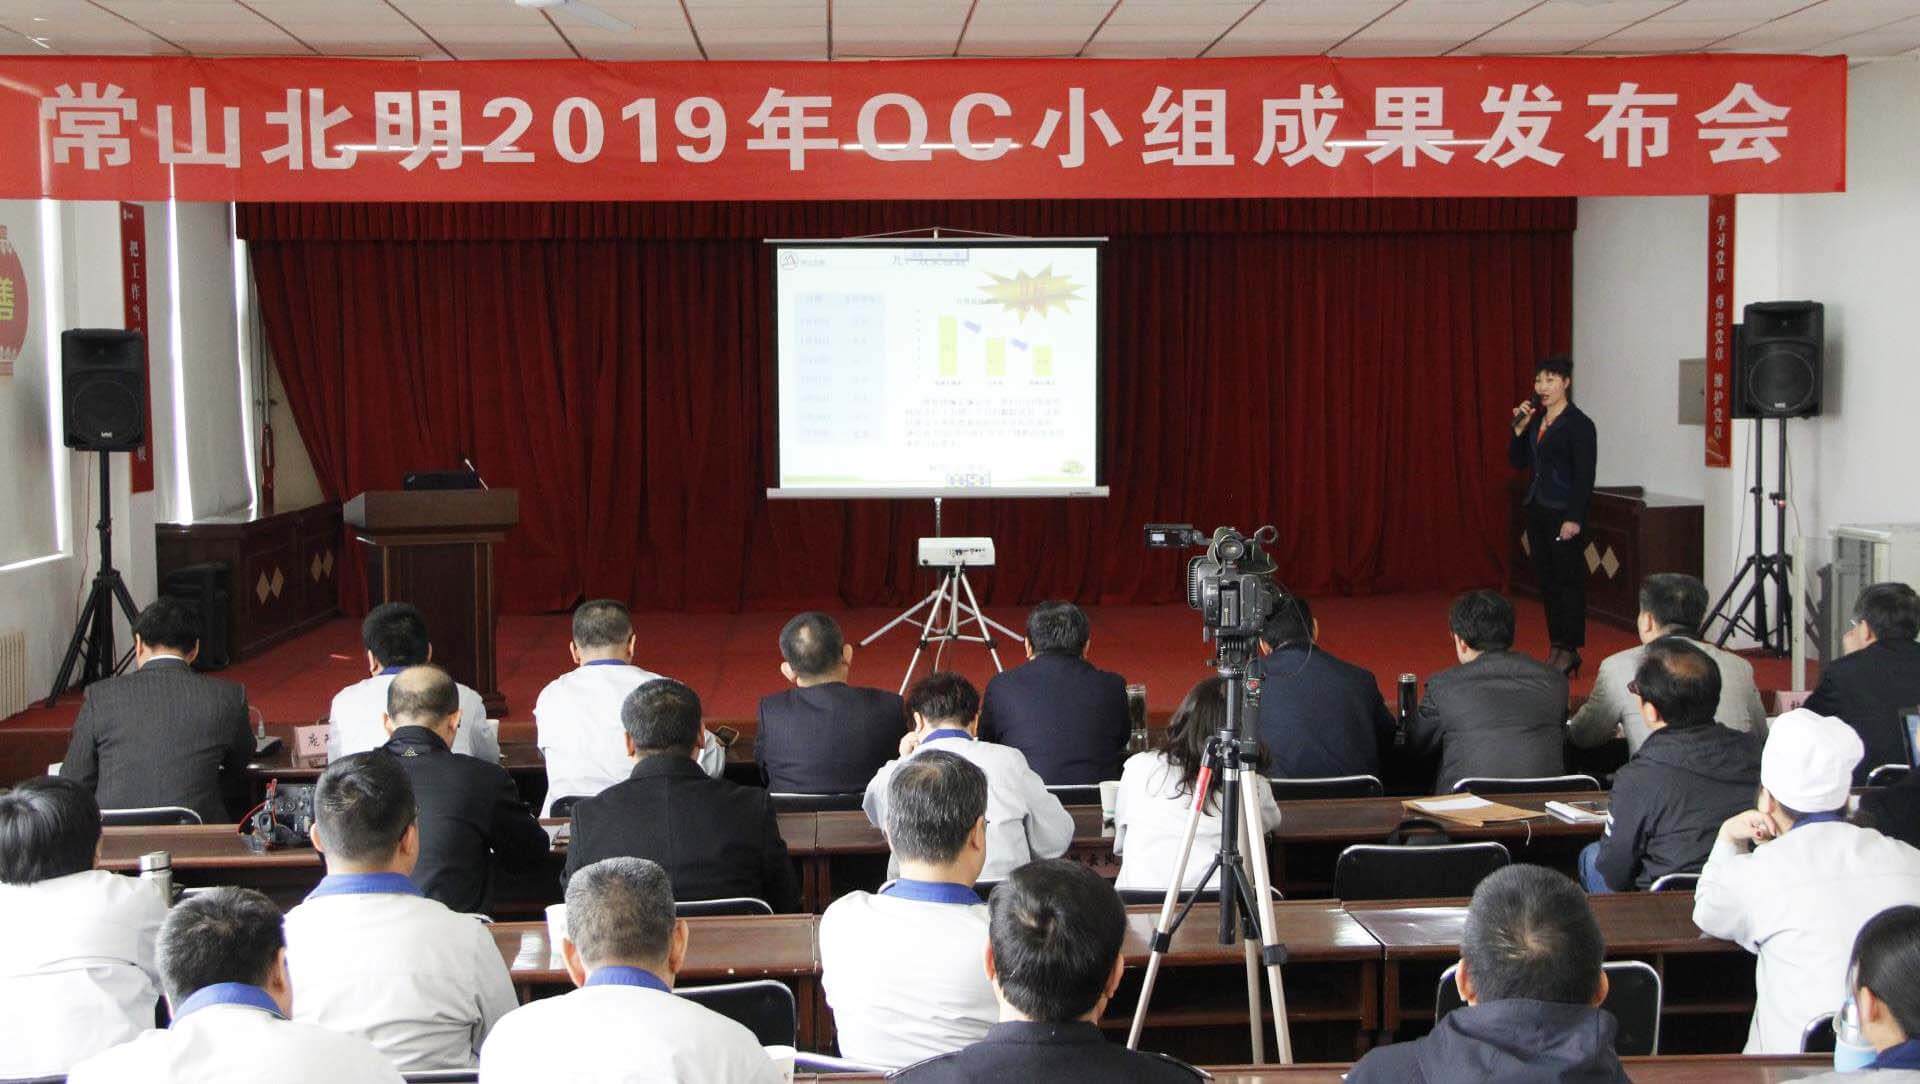 Changshan Beiming Holds QC Achievement Conference in 2019